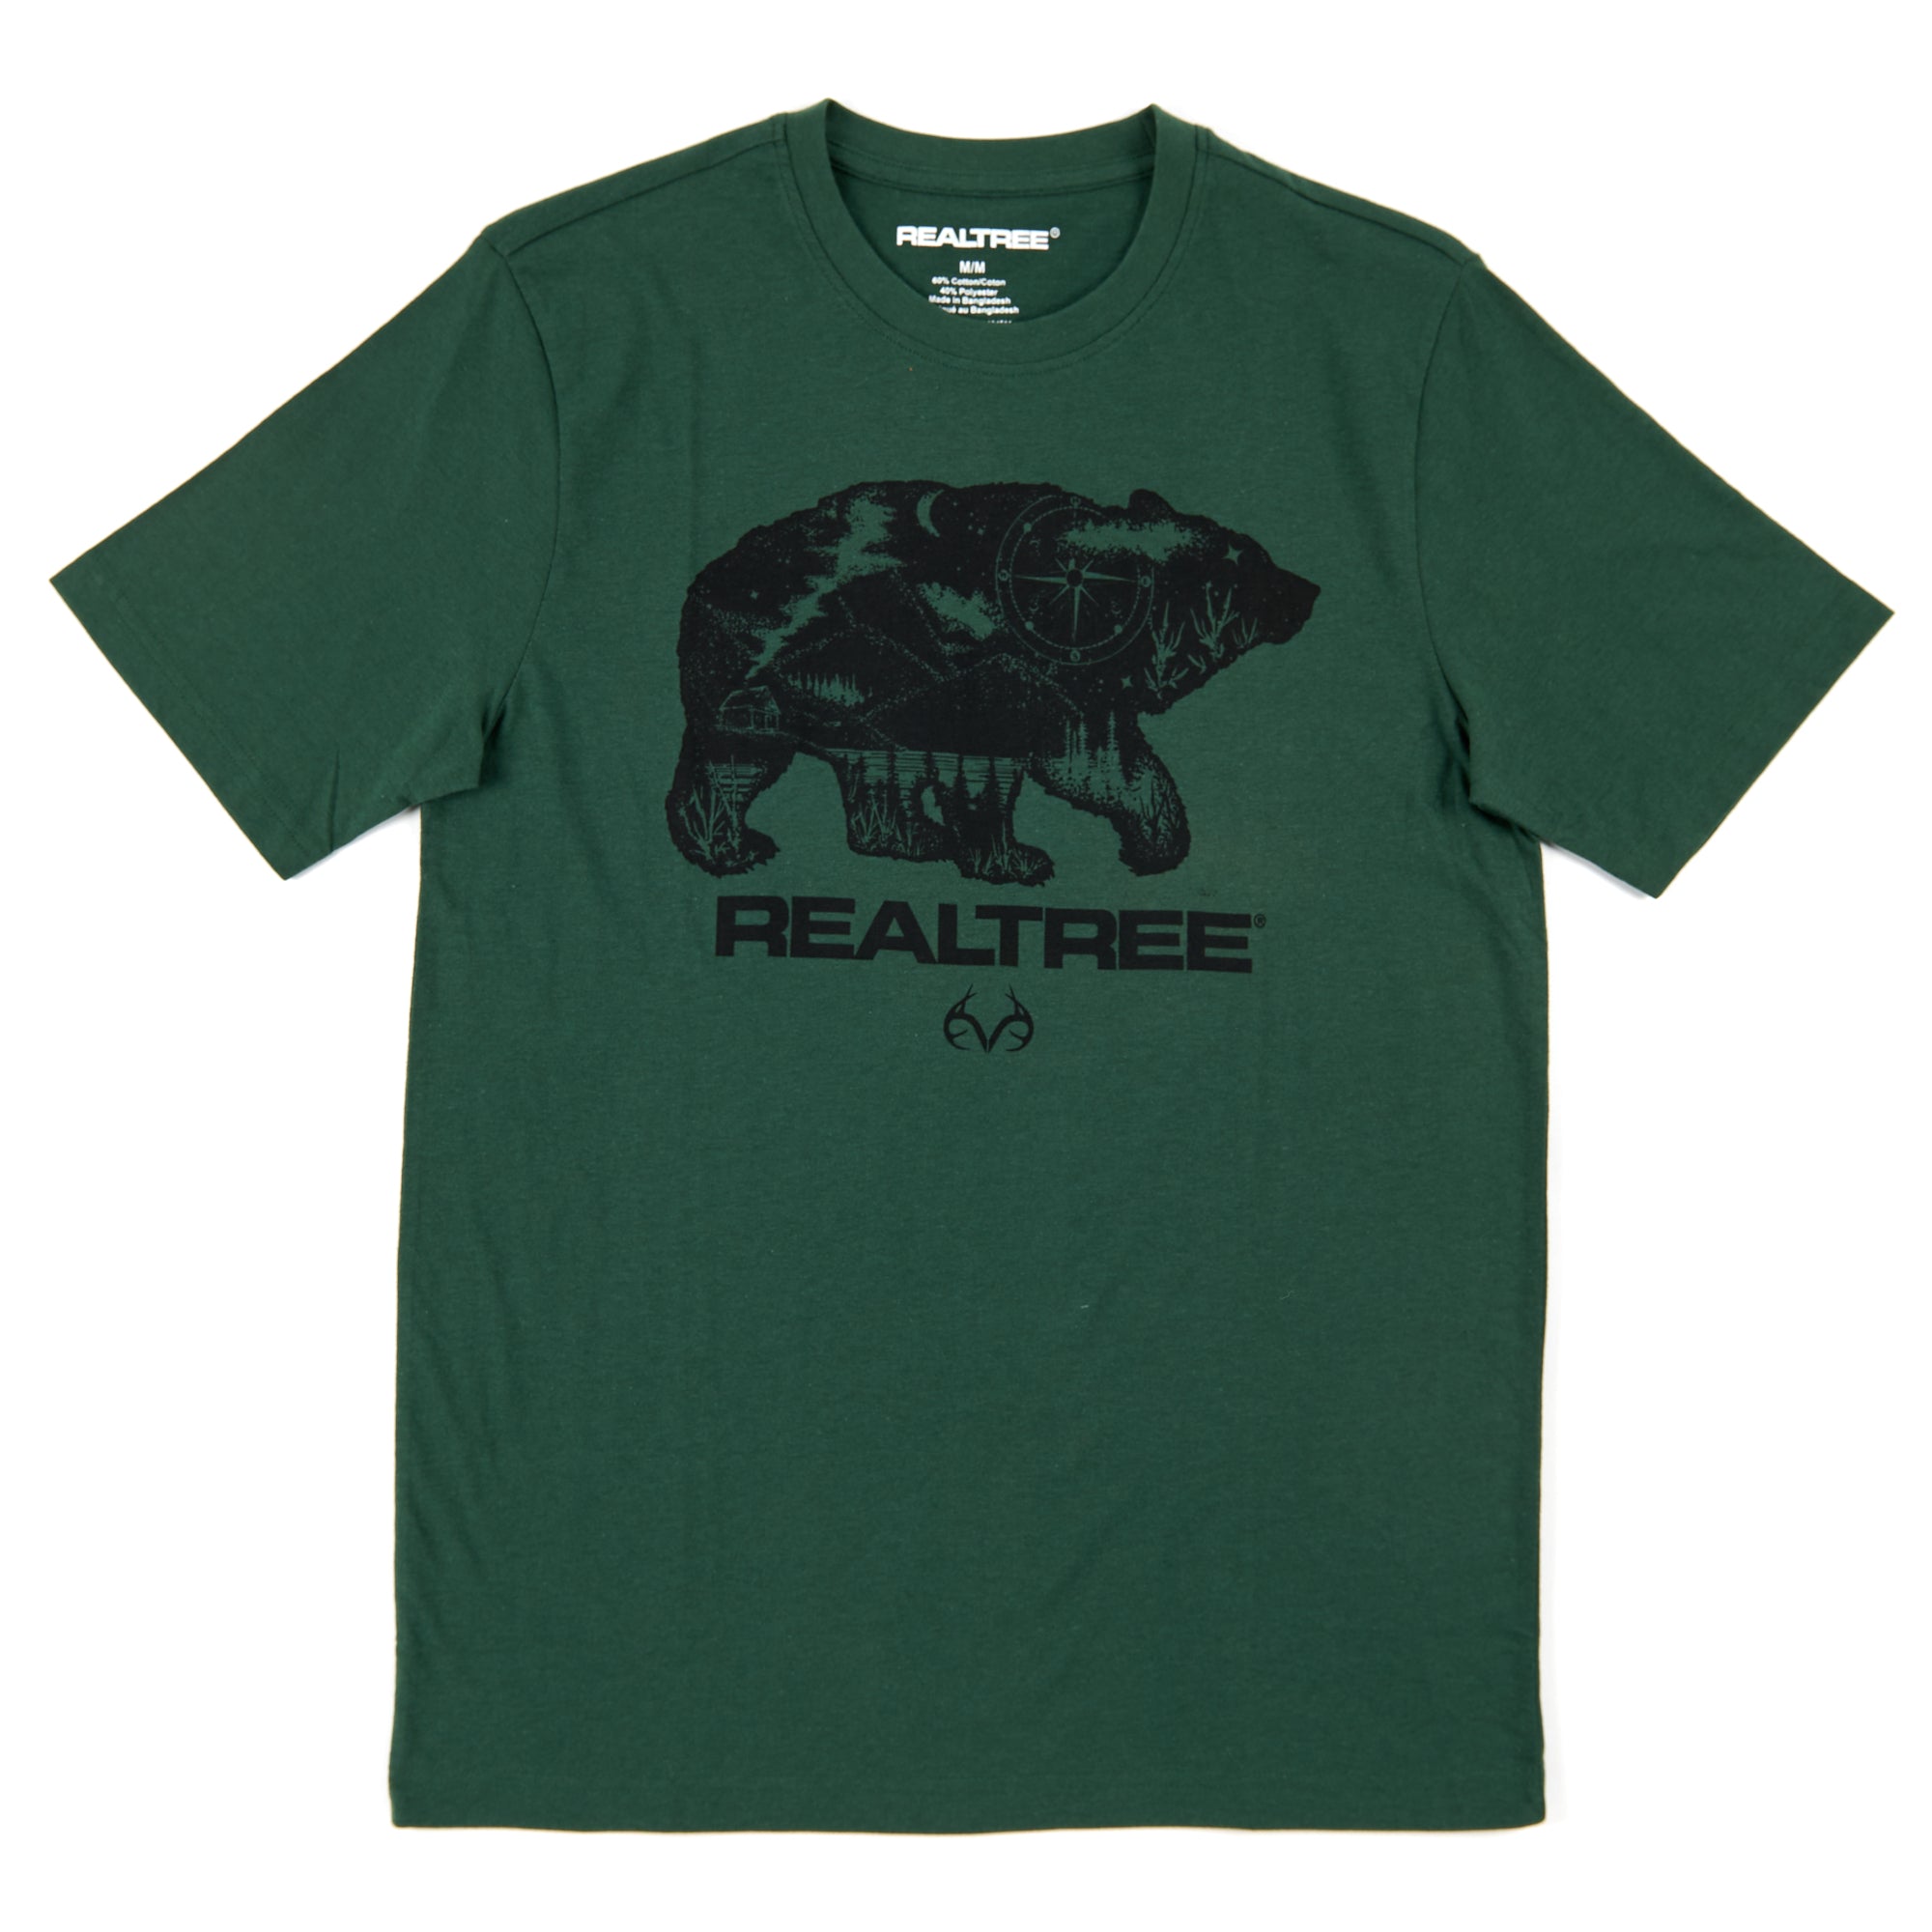 Realtree Men's Cotton T-Shirt with Graphic Print